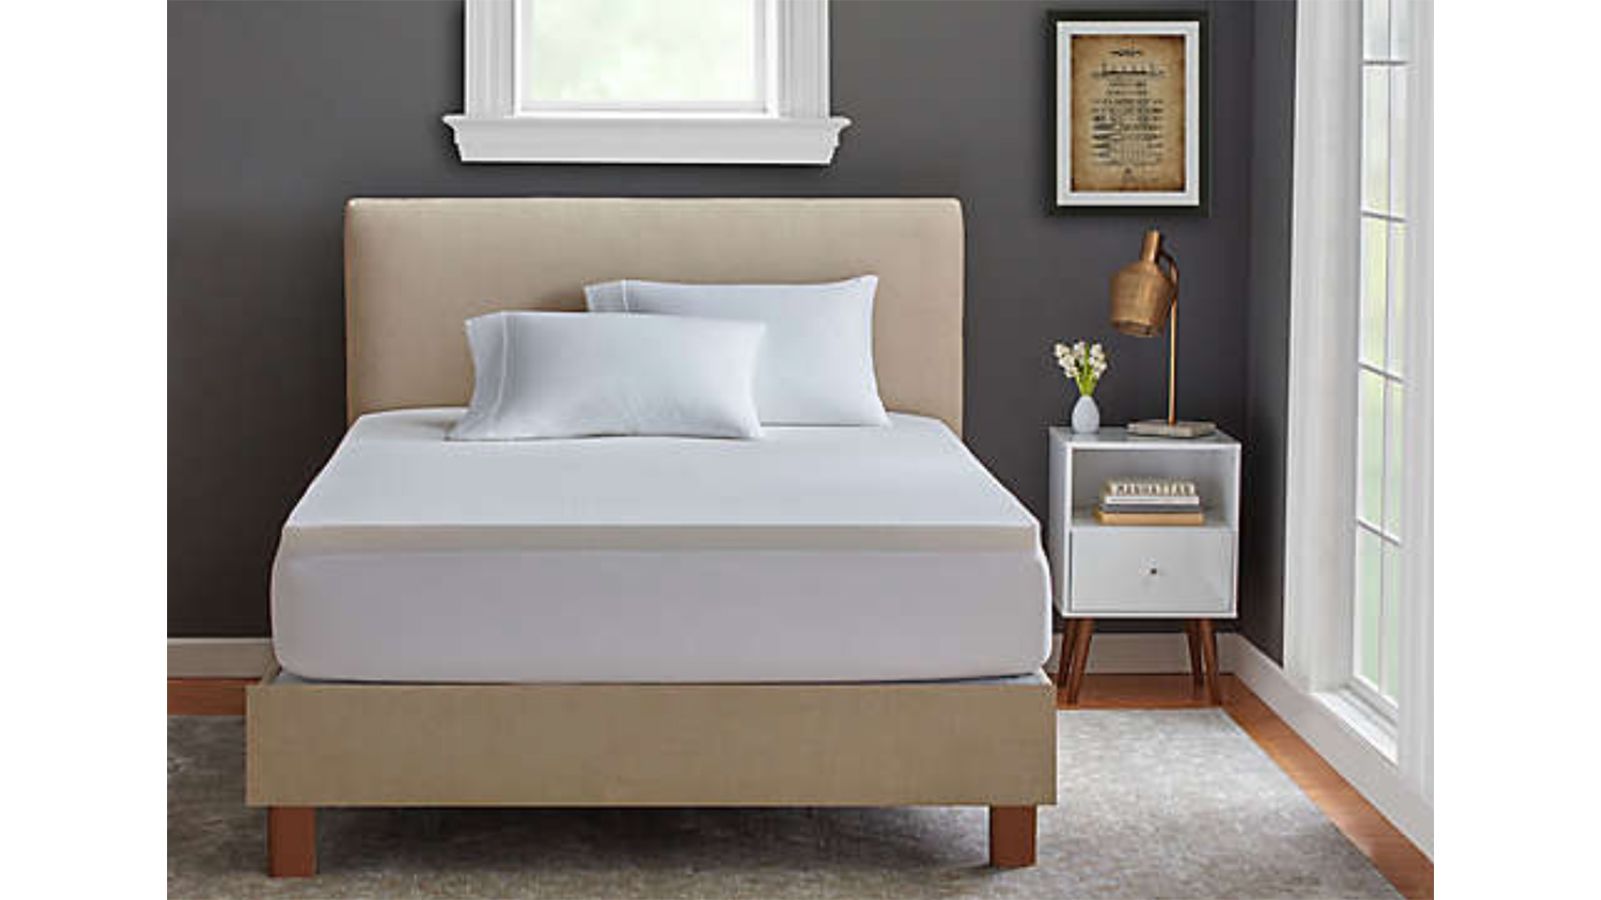 Twin Xl Bedding For Your College Dorm, Bed Bath And Beyond Mattress Pad Twin Xl